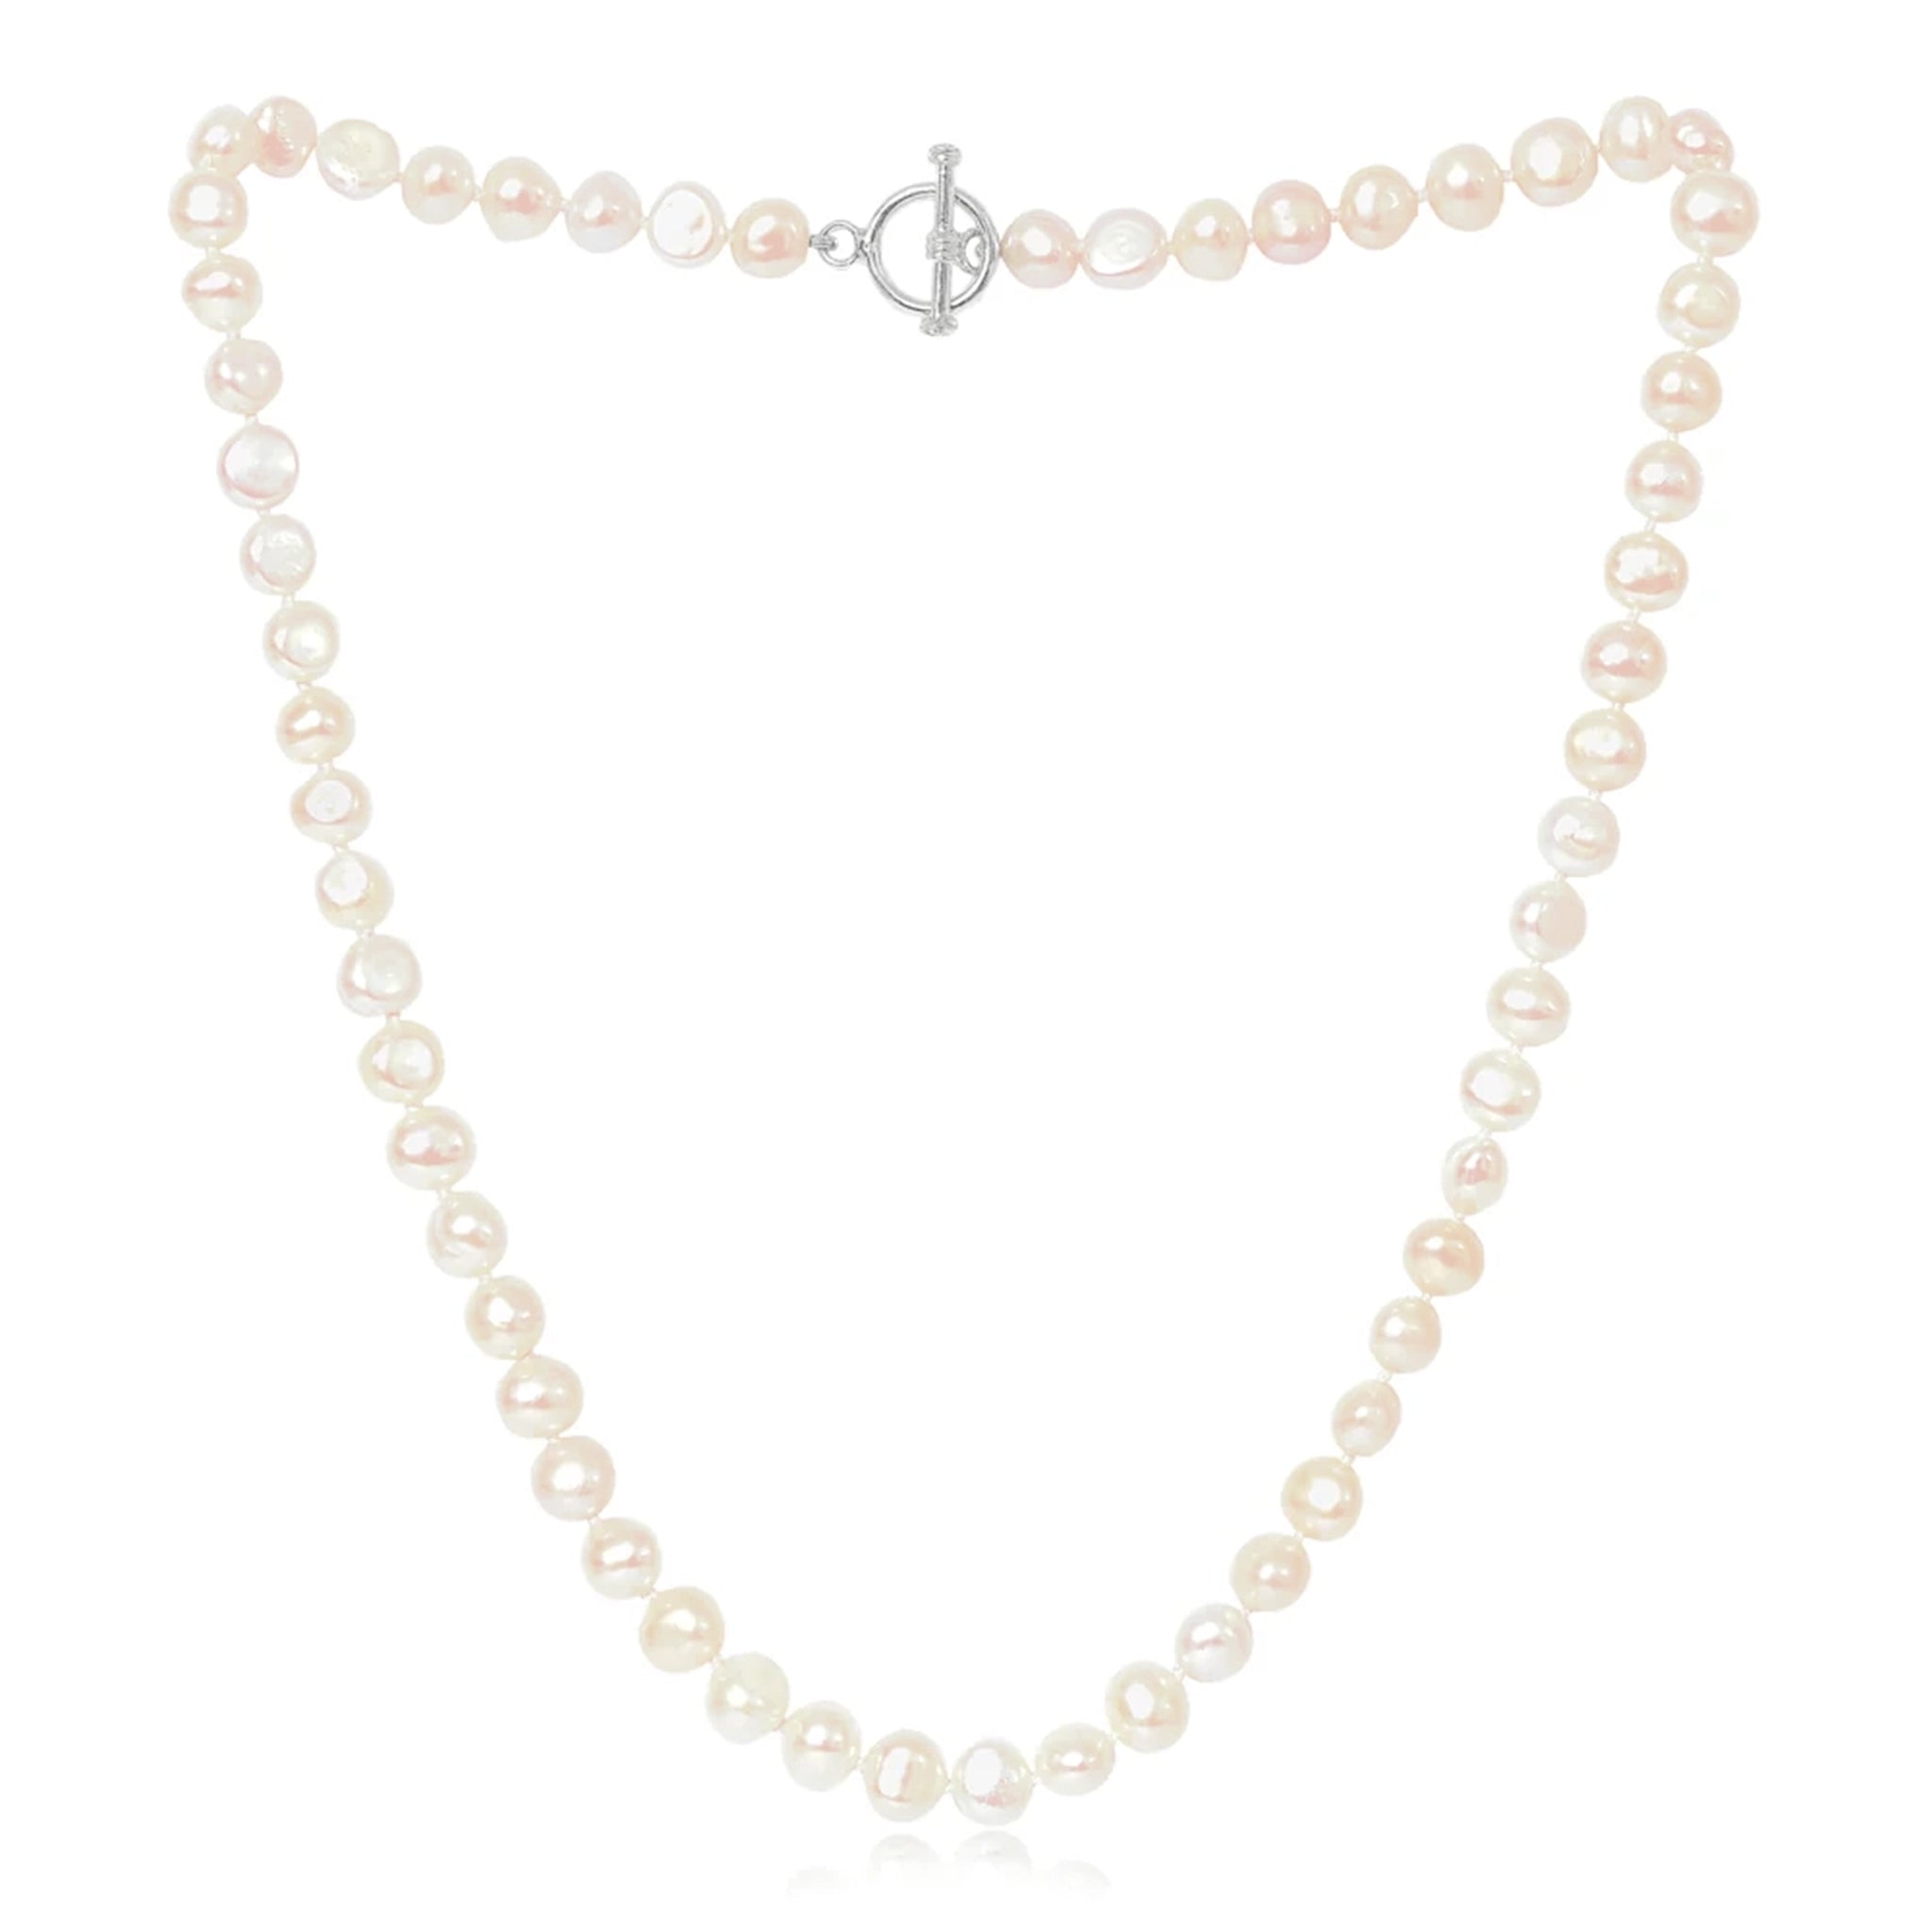 A silver toggle clasp necklace strung with natural shaped pink freshwater pearls